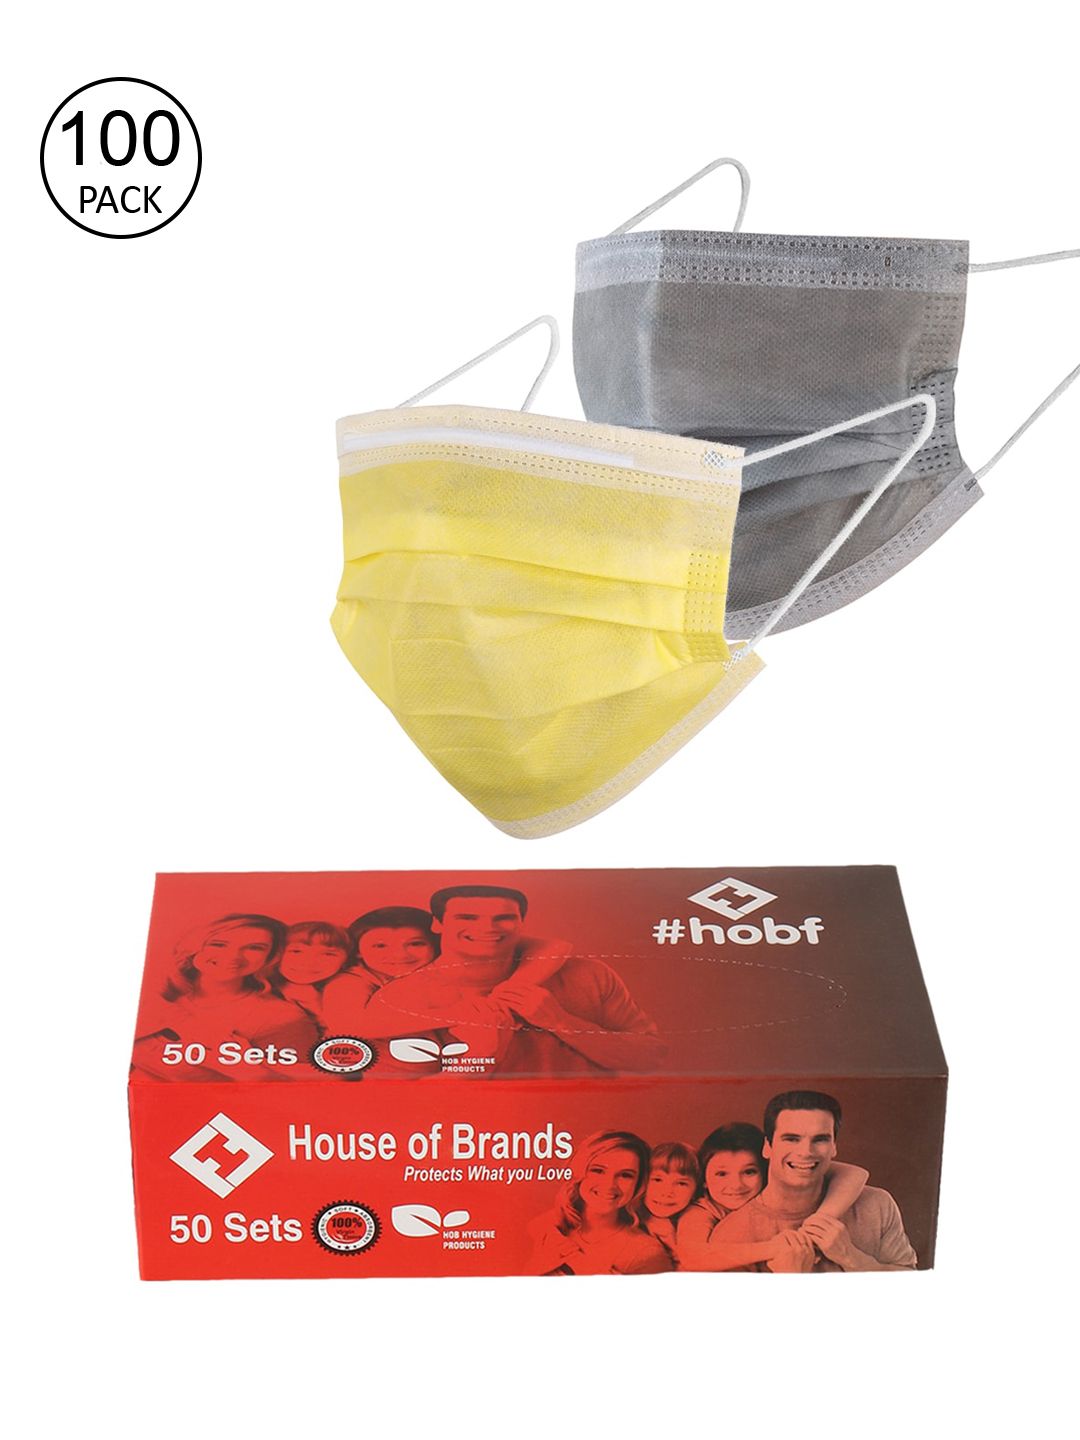 LONDON FASHION hob Unisex Pack of 100 3-Ply Disposable Masks Price in India